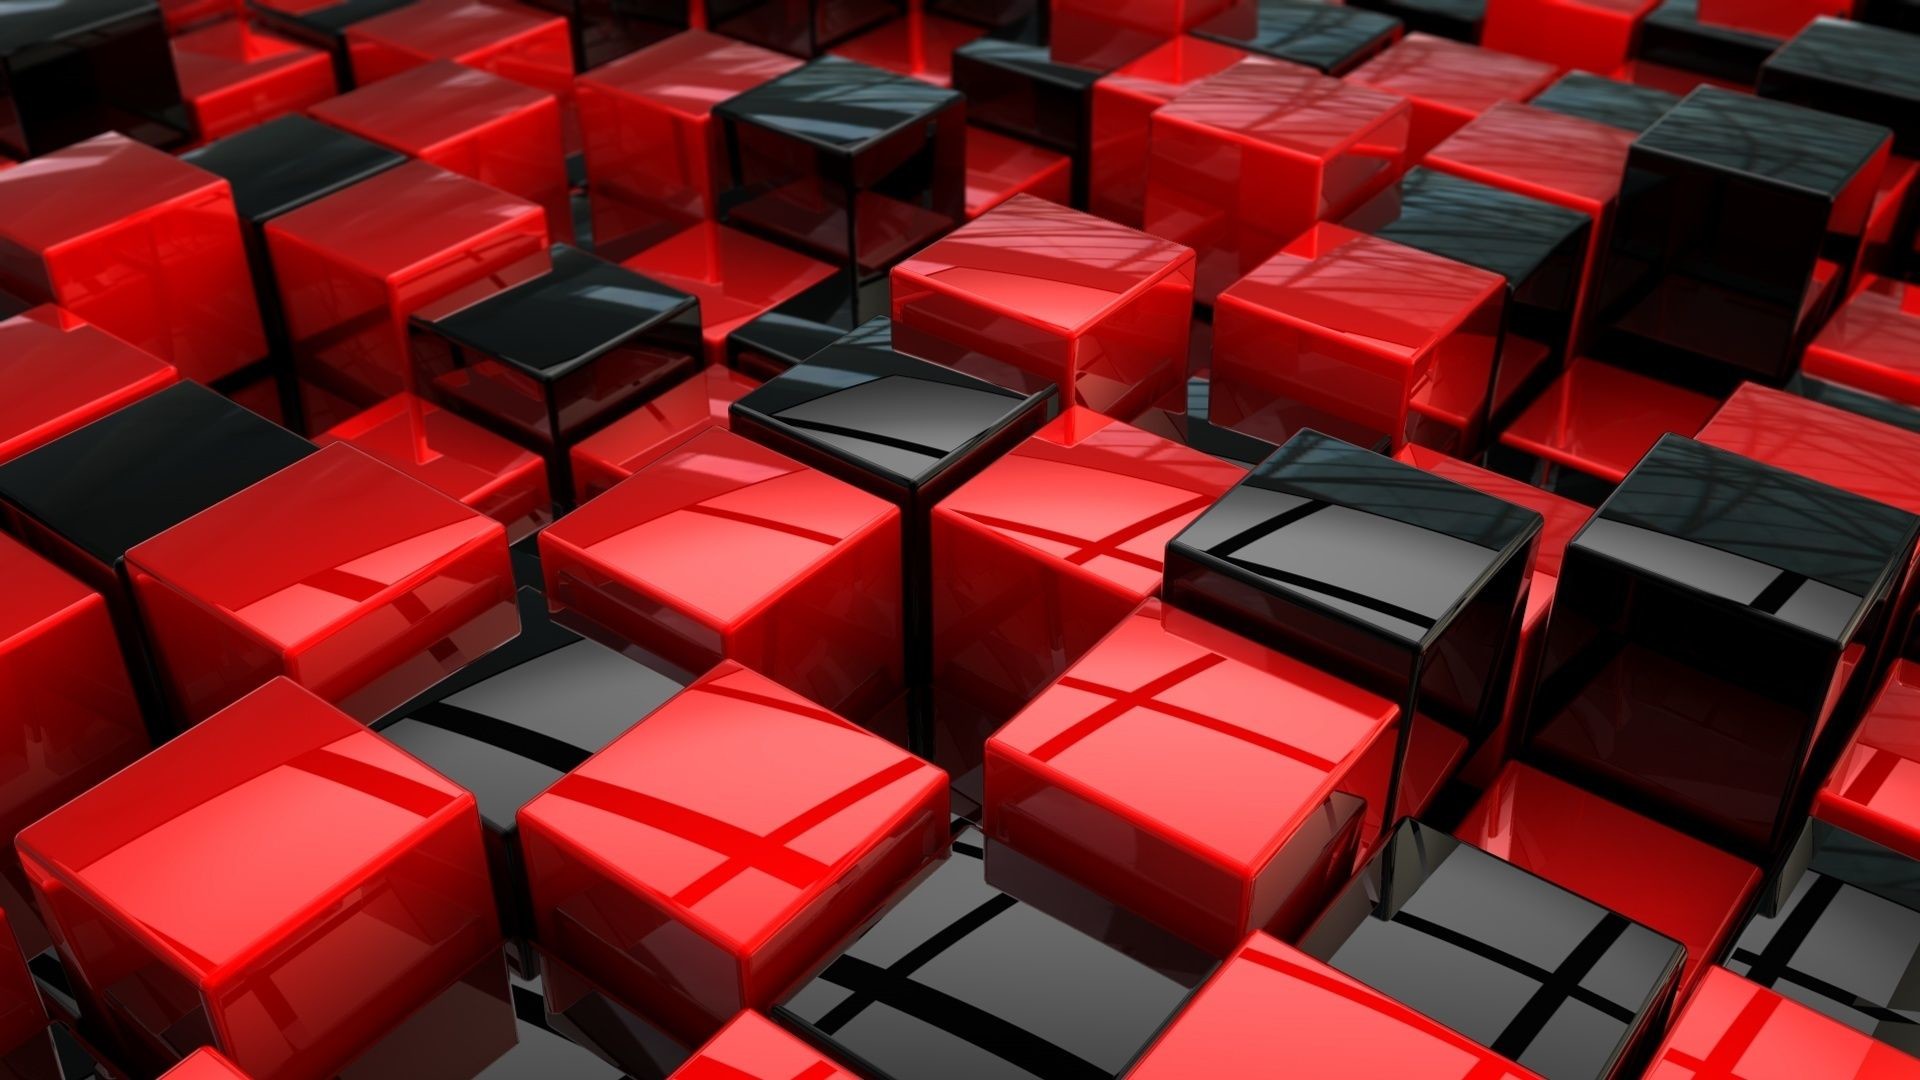 1920x1080 3D Red And Black Cubes Wallpaper | HD 3D and Abstract Wallpaper Free  Download ...